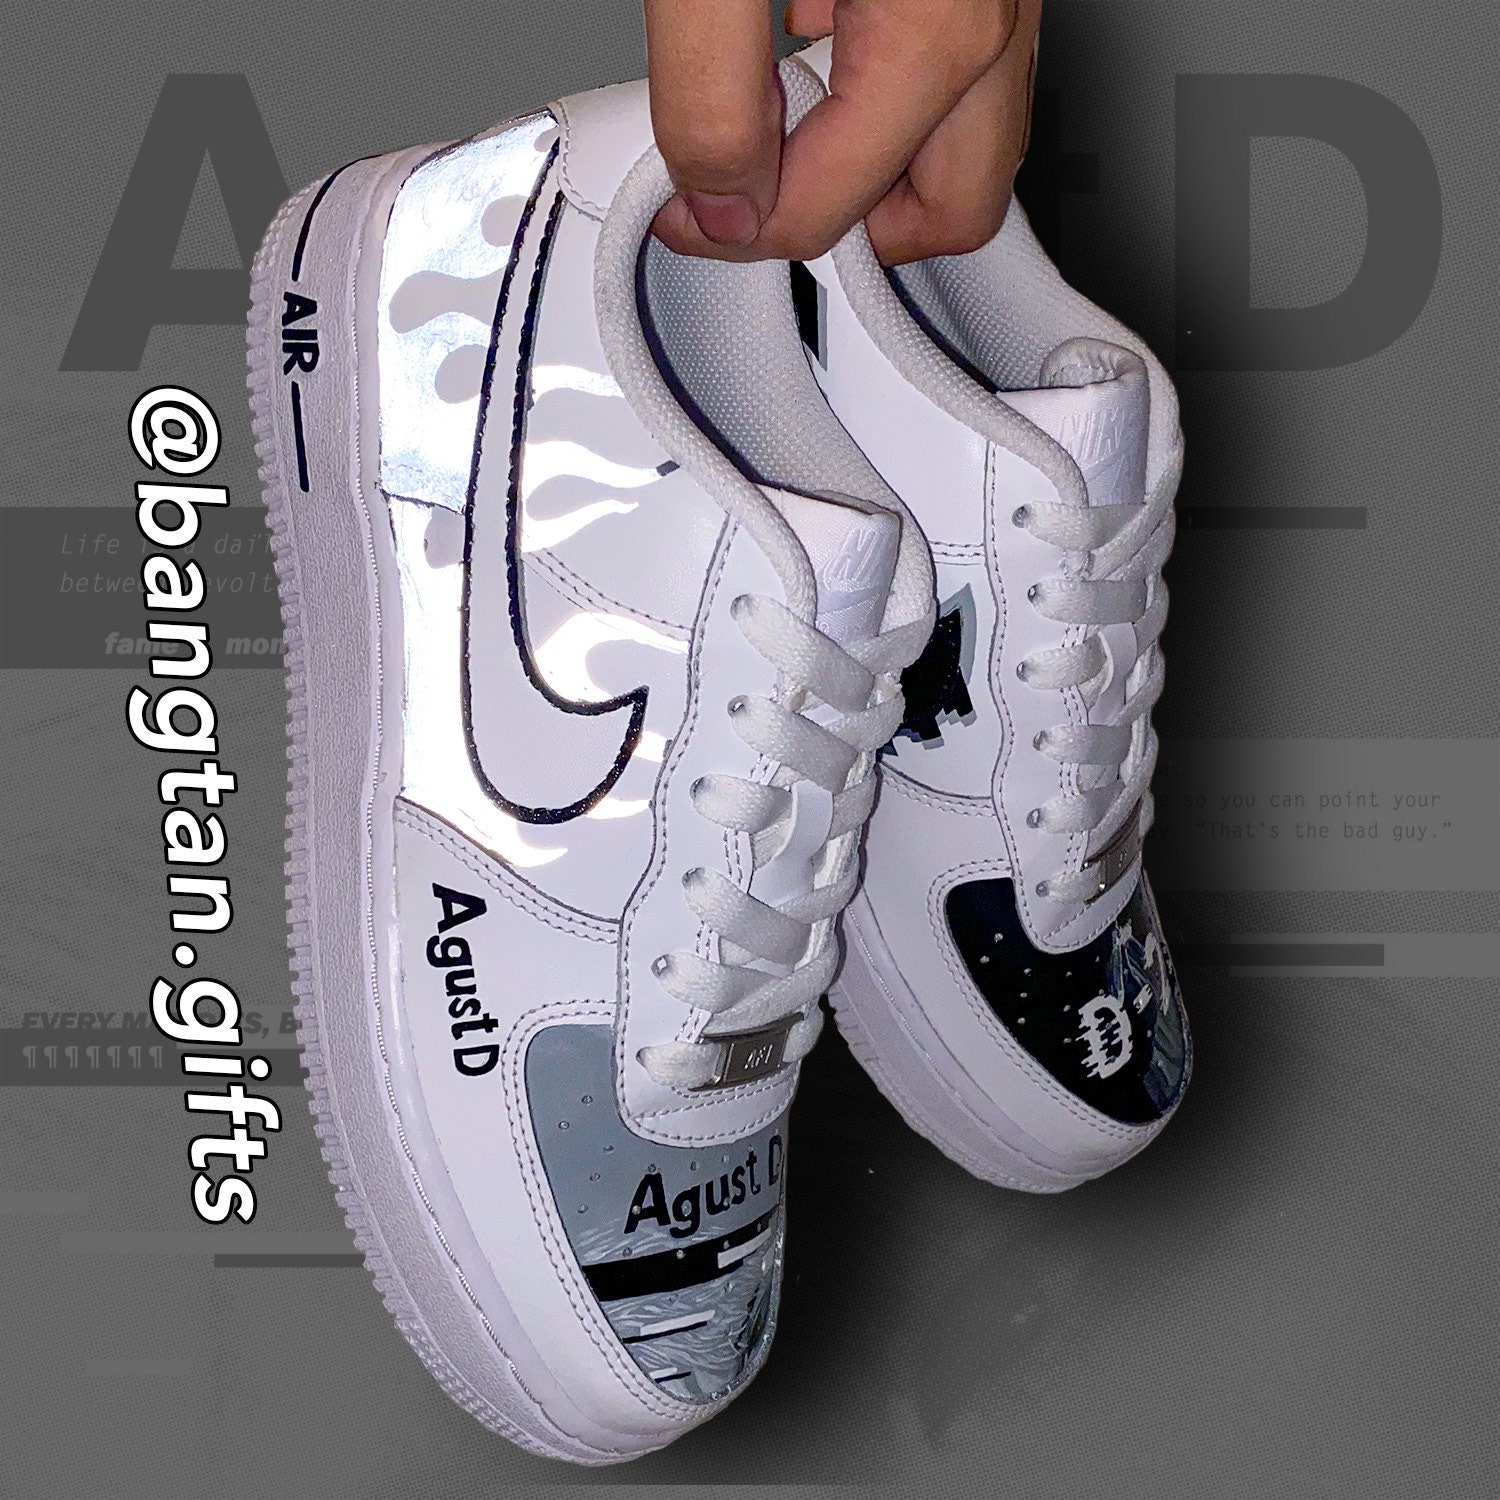 Cosquillas odio Eso Agust-D/D-2 BtS Zapatos Nike Air Force 1s personalizados - Etsy España